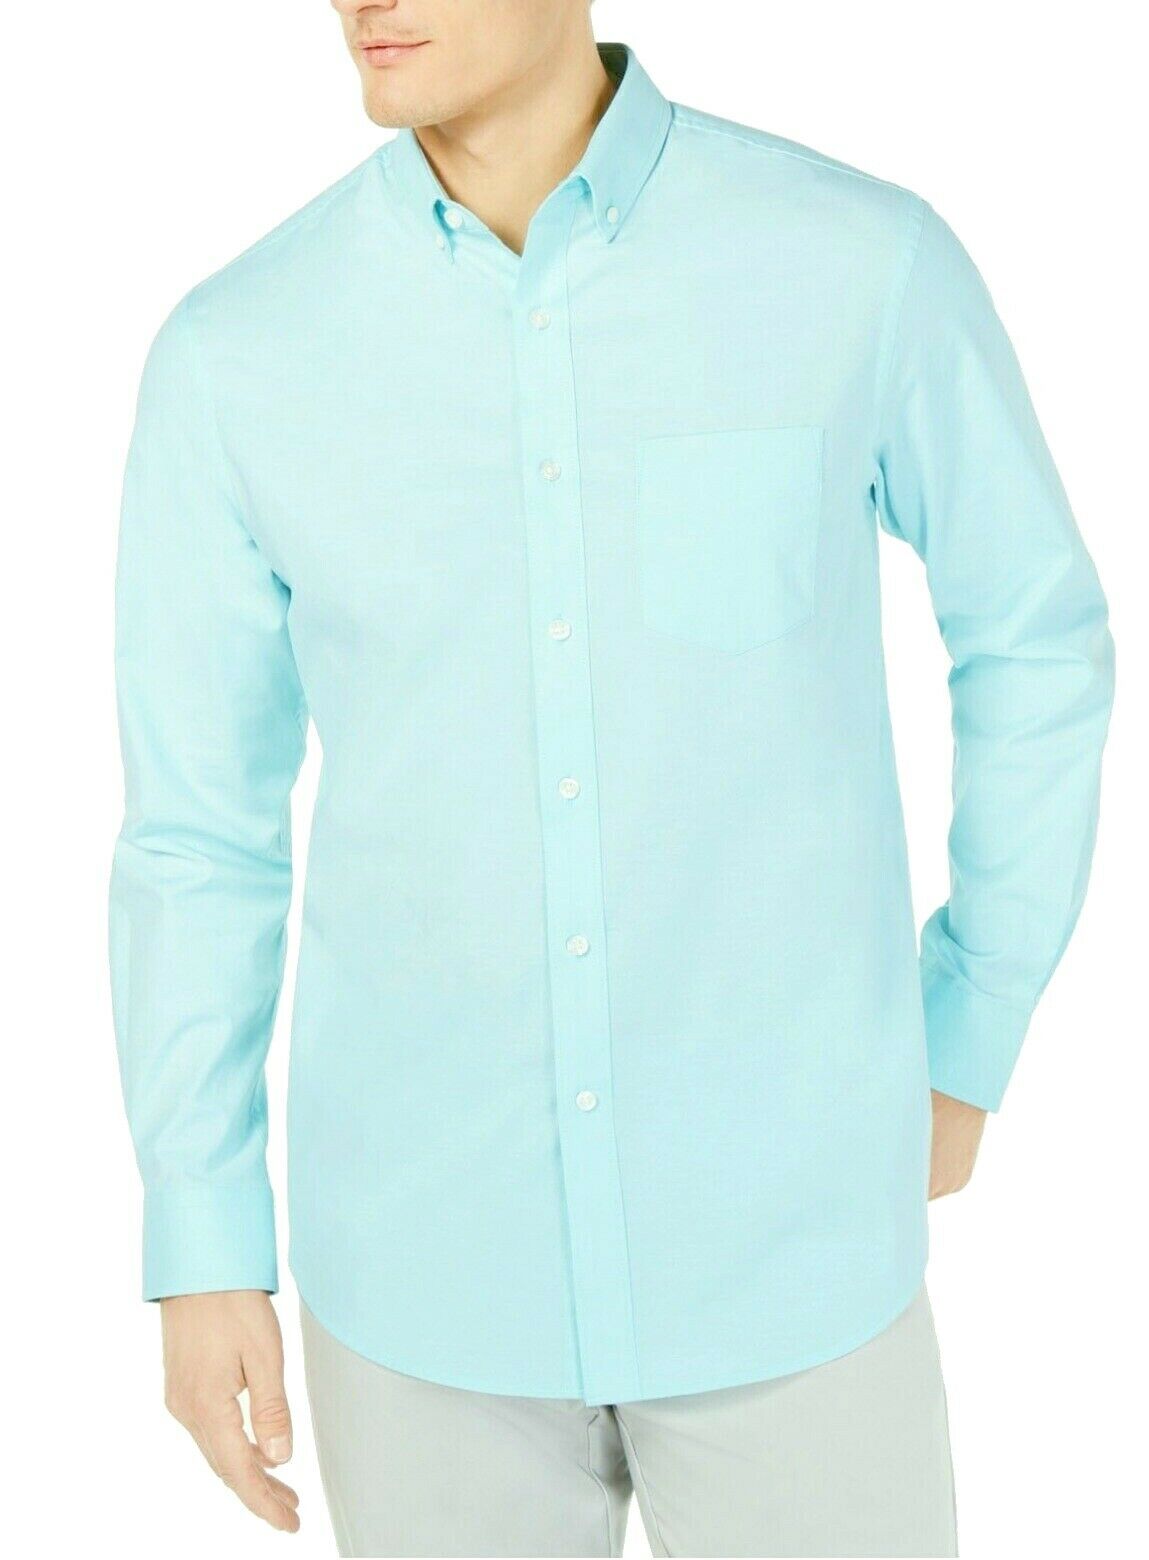 CLUBROOM Mens Oxford Turquoise Classic Fit Button Down Stretch Casual Shirt S